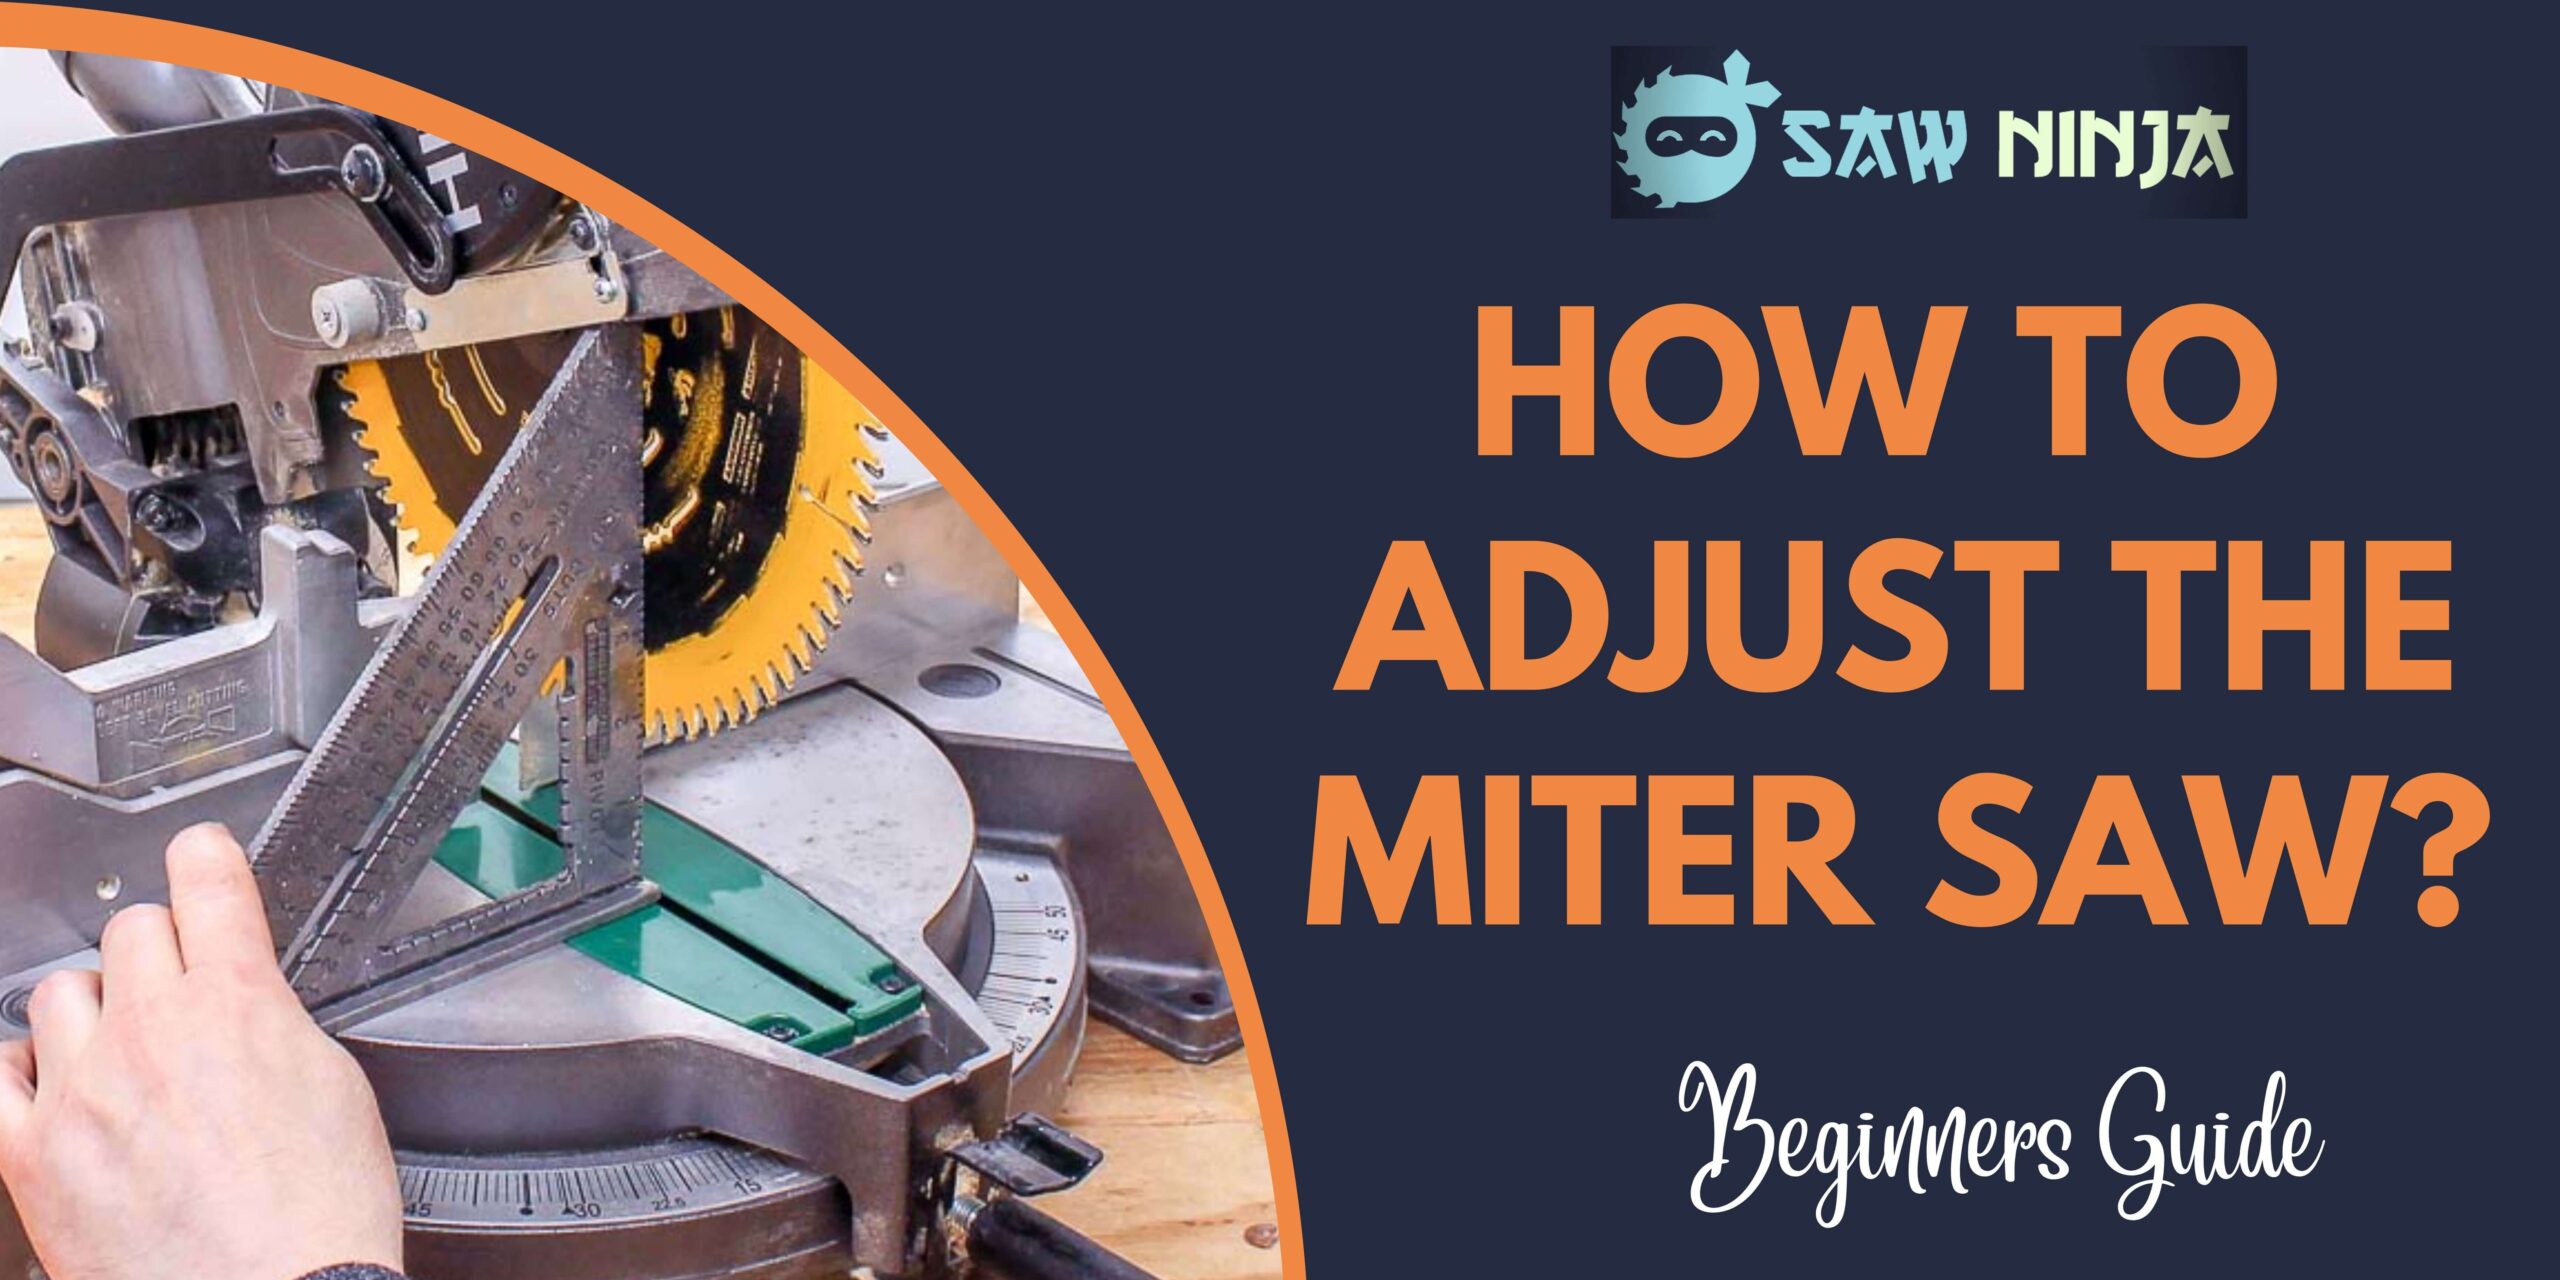 How to Adjust the Miter Saw